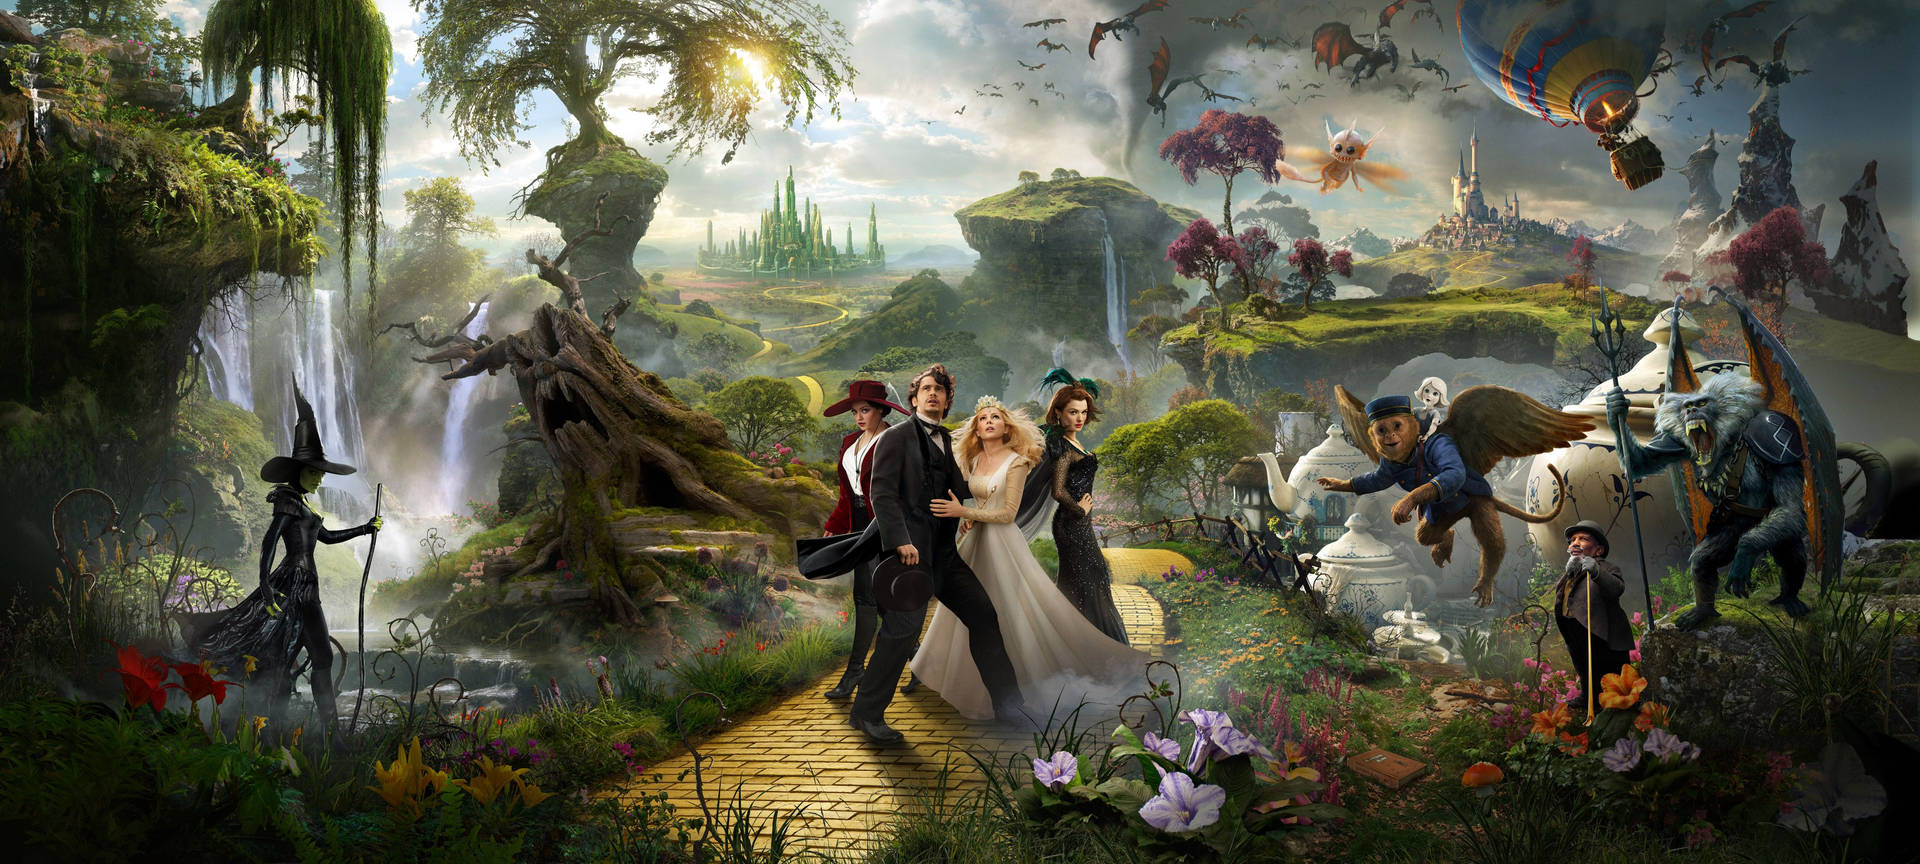 Oz The Great And Powerful Cast